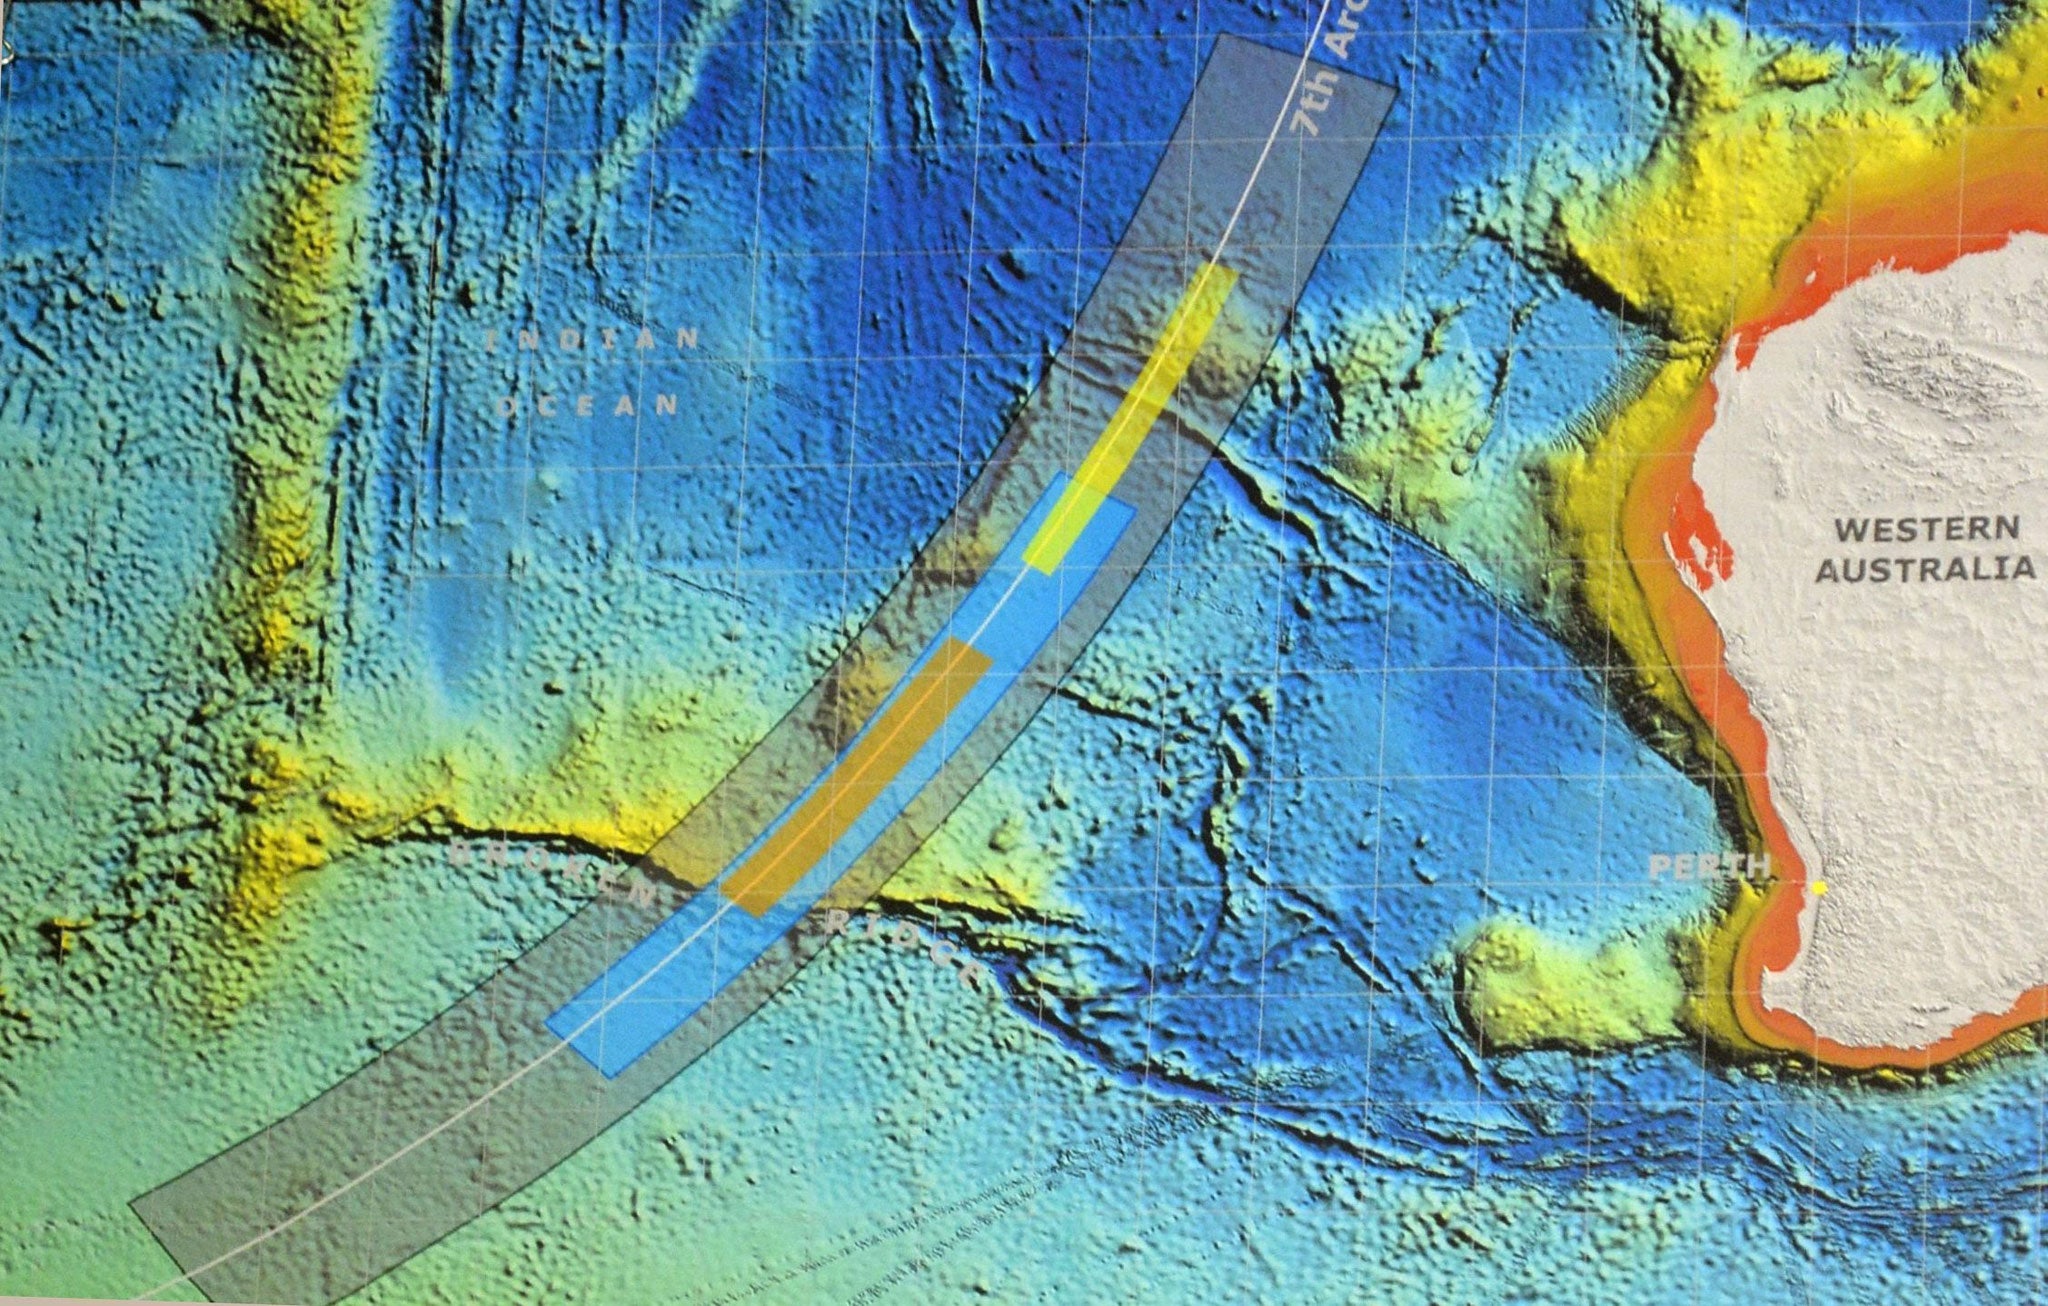 Map showing the new search area in the Indian ocean for missing Malaysia Airlines flight MH370